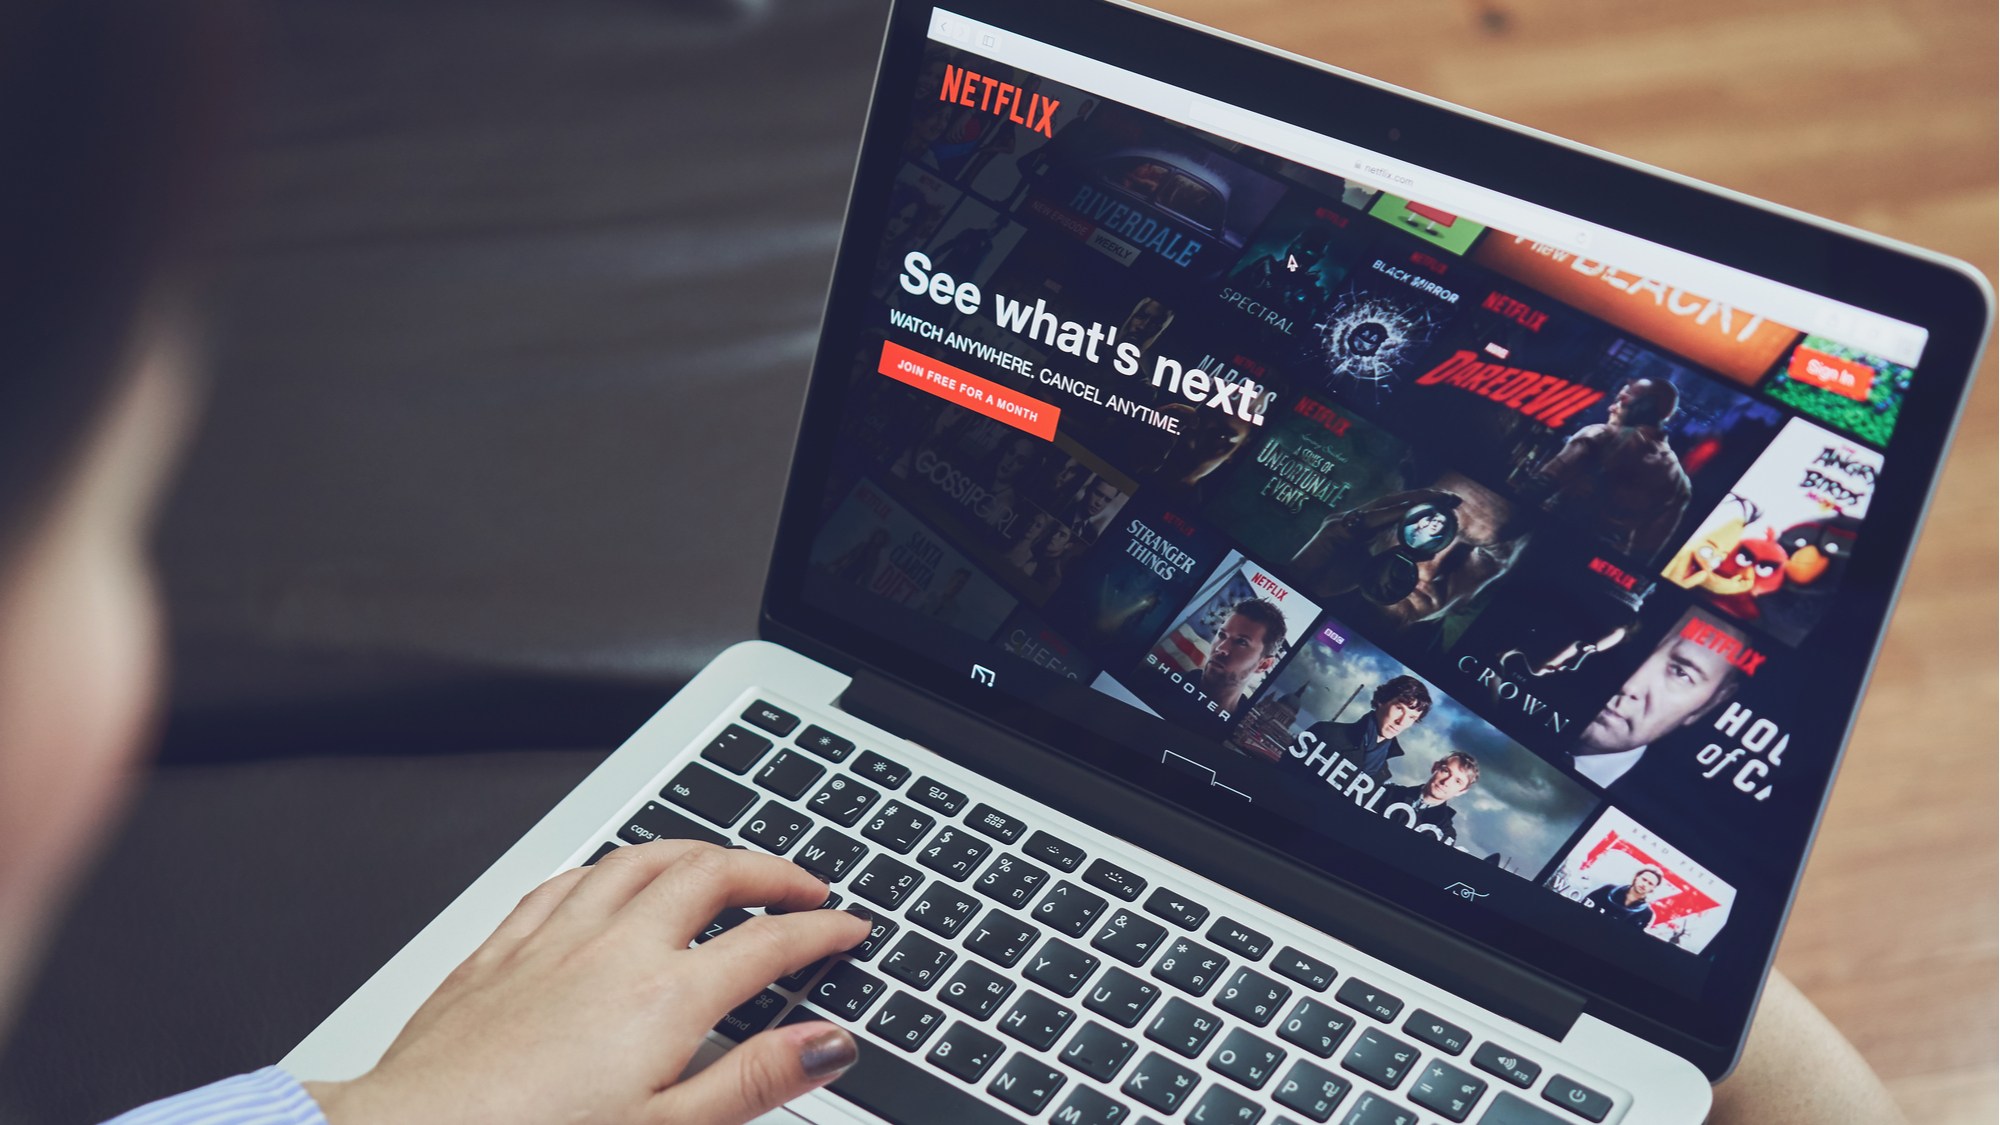 Netflix shuffle option for watching series in test phase